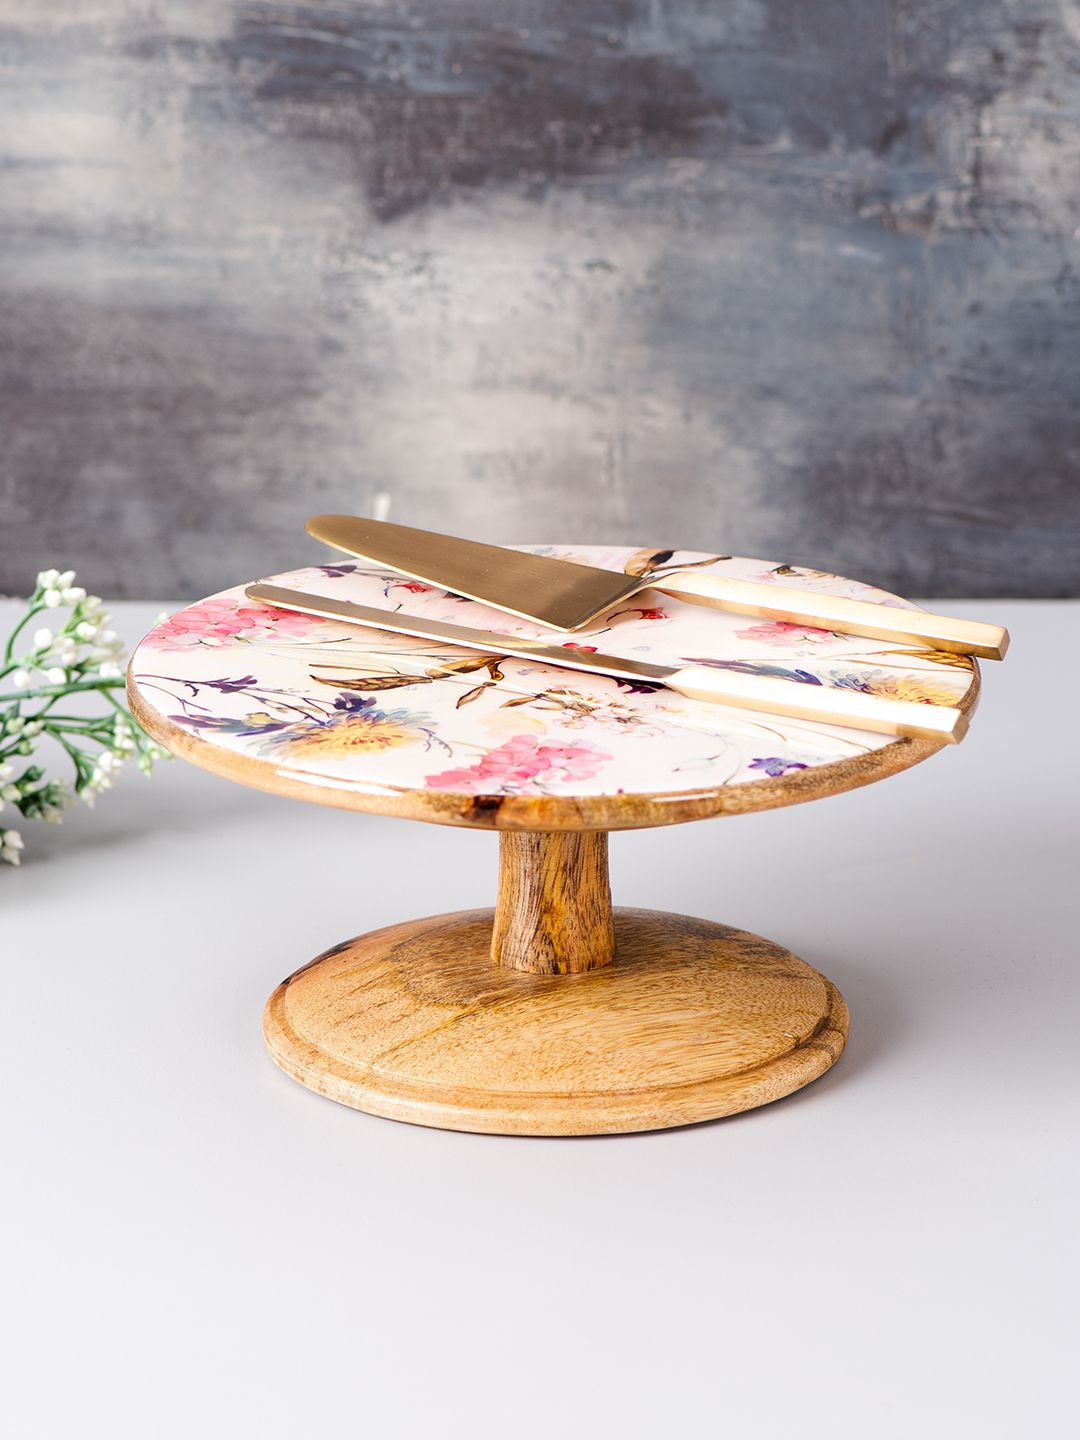 nestroots Multicoloured Printed Teak Wood Cake Stand With Knife & Server Price in India